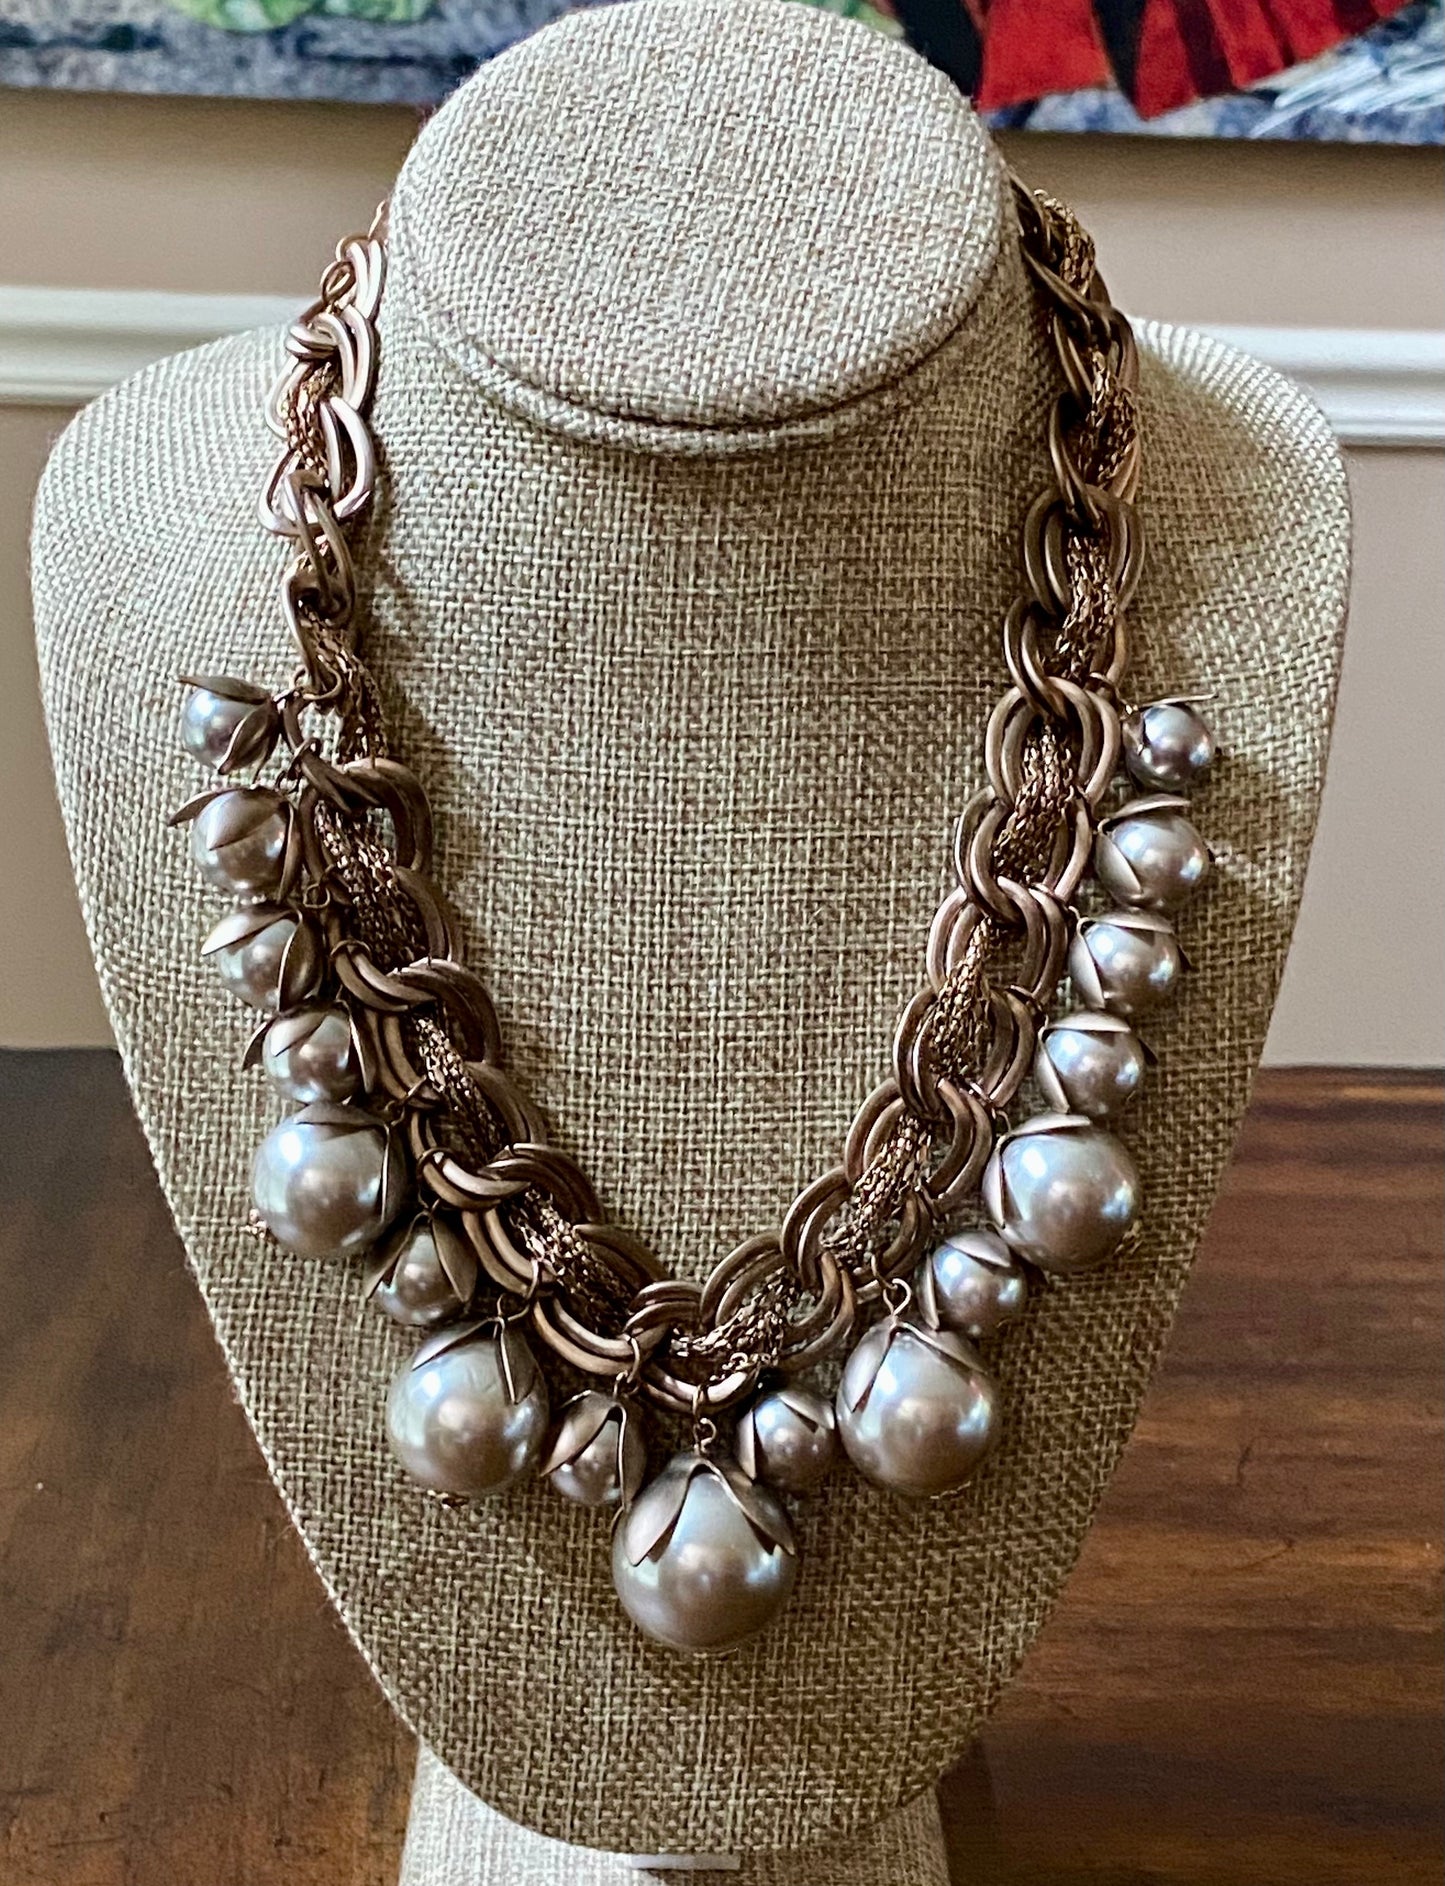 Matte Metallic Rose Gold Chain Link and Pearl Necklace